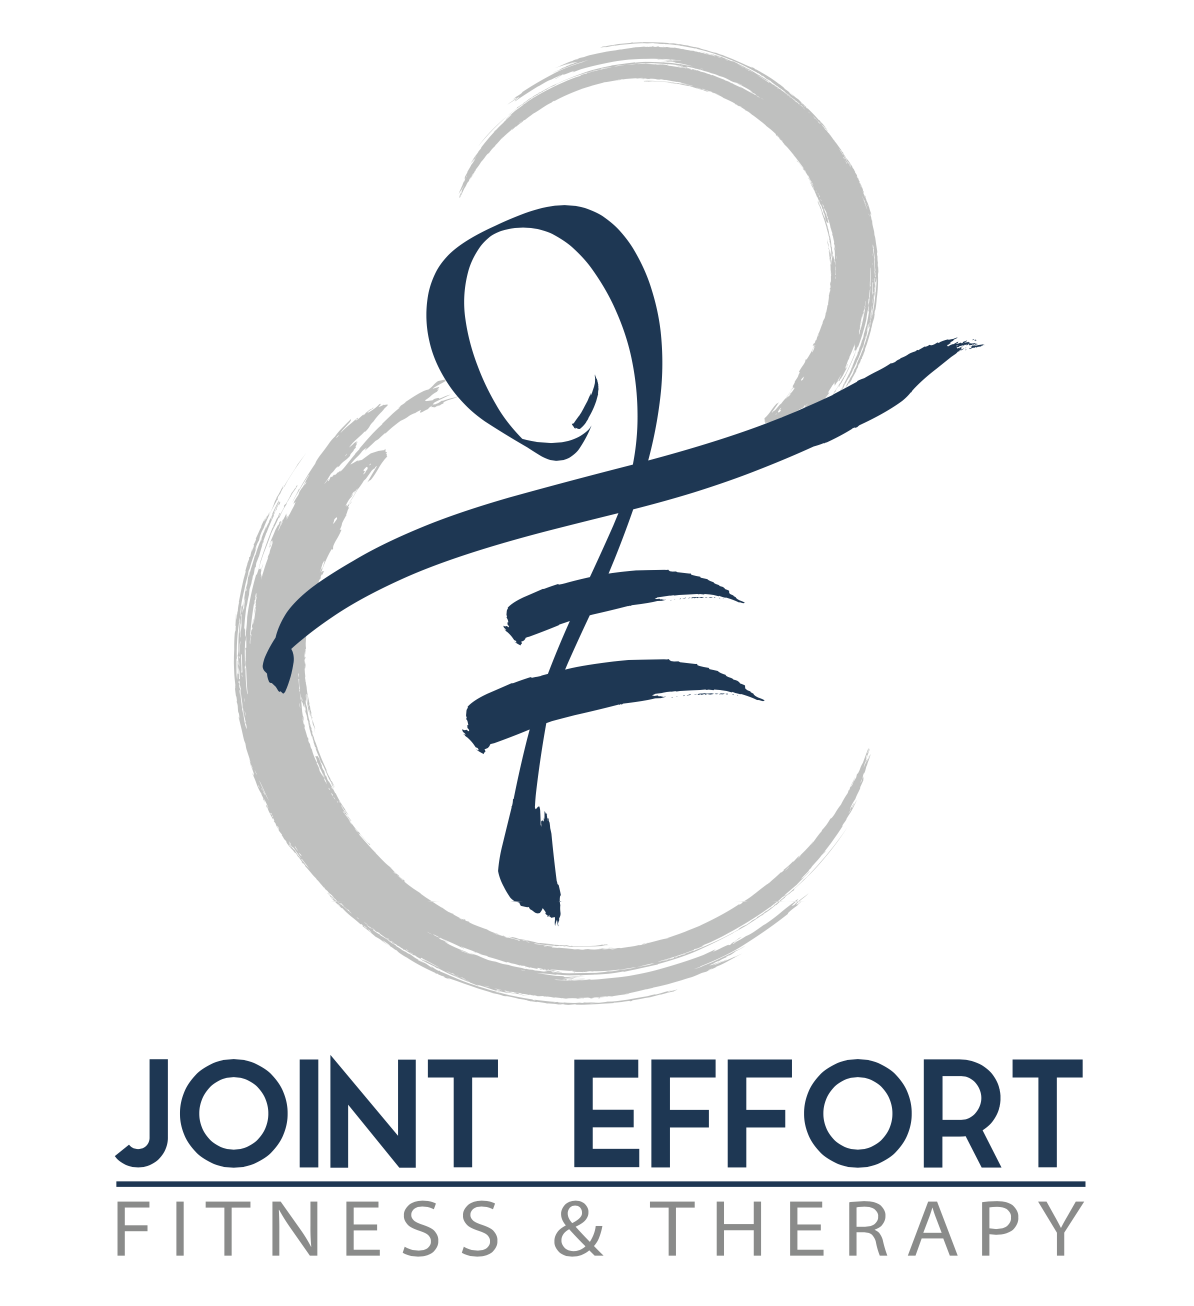 Effort Logo - Joint Effort Fitness & Therapy — Joint Effort Fitness & Therapy